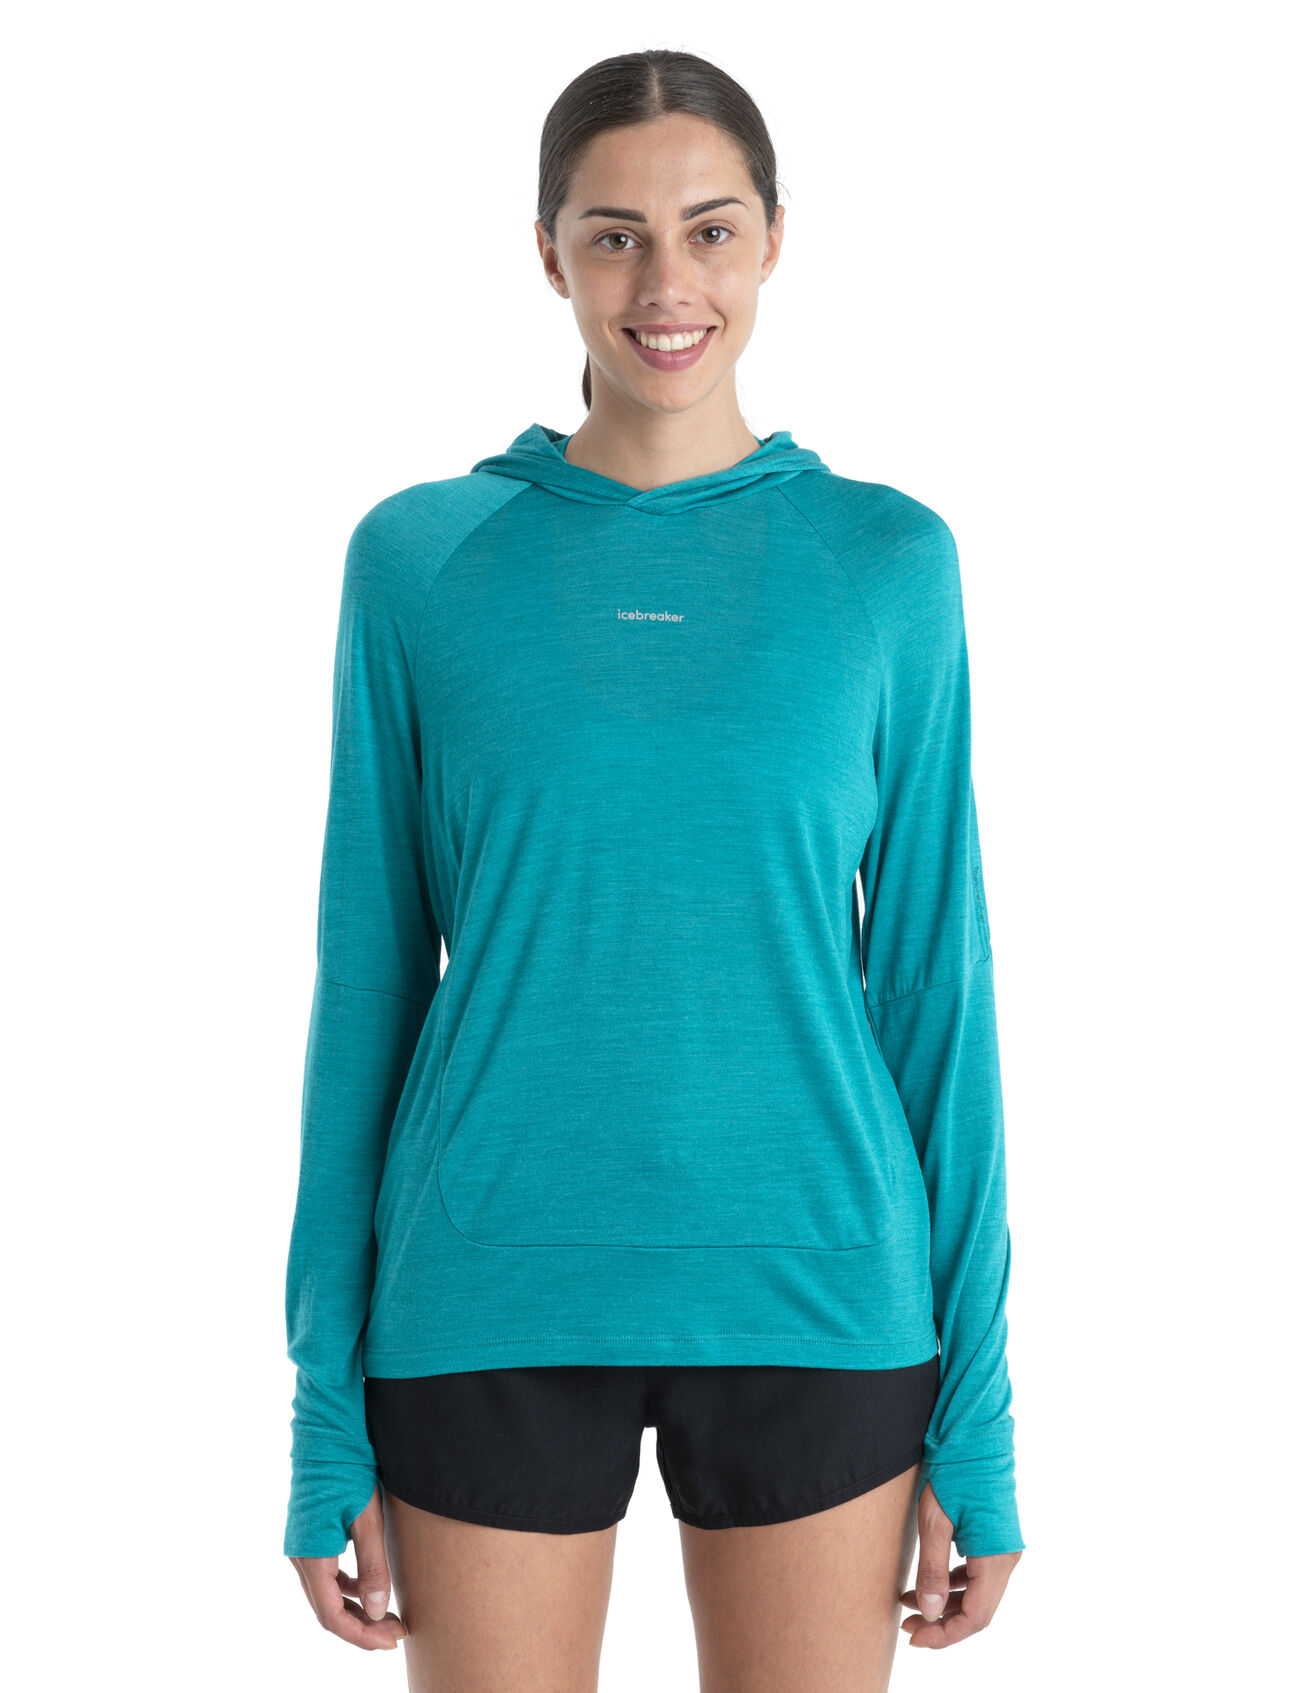 Womens 125 Cool-Lite™ Merino Long Sleeve Hoodie A lightweight and breathable performance hoodie designed for aerobic days outside, the Cool-Lite™ Long Sleeve Hoodie features our moisture-wicking Cool-Lite™ merino jersey fabric.